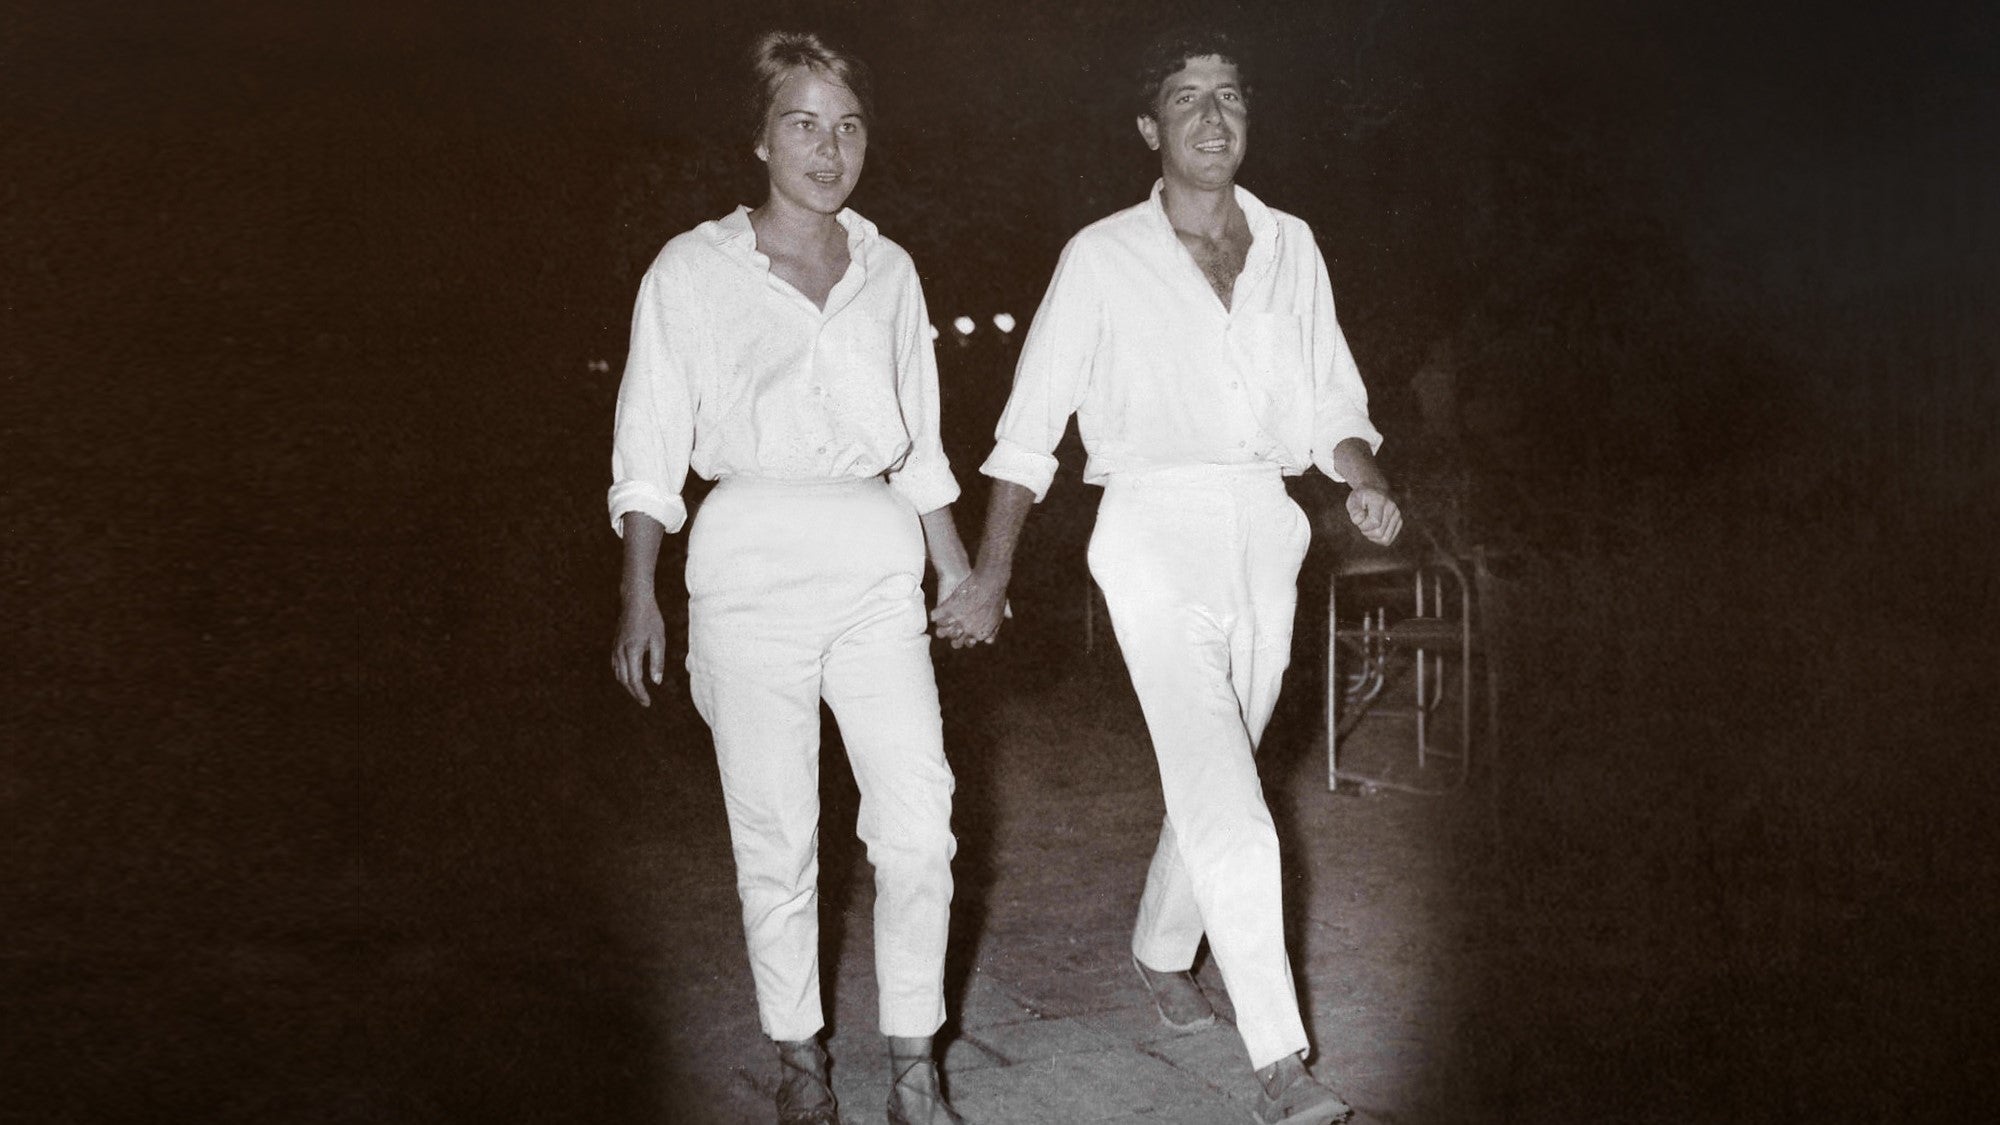 Cohen and Marianne Ihlen were lovers in the 1960s but maintained a lifelong friendship